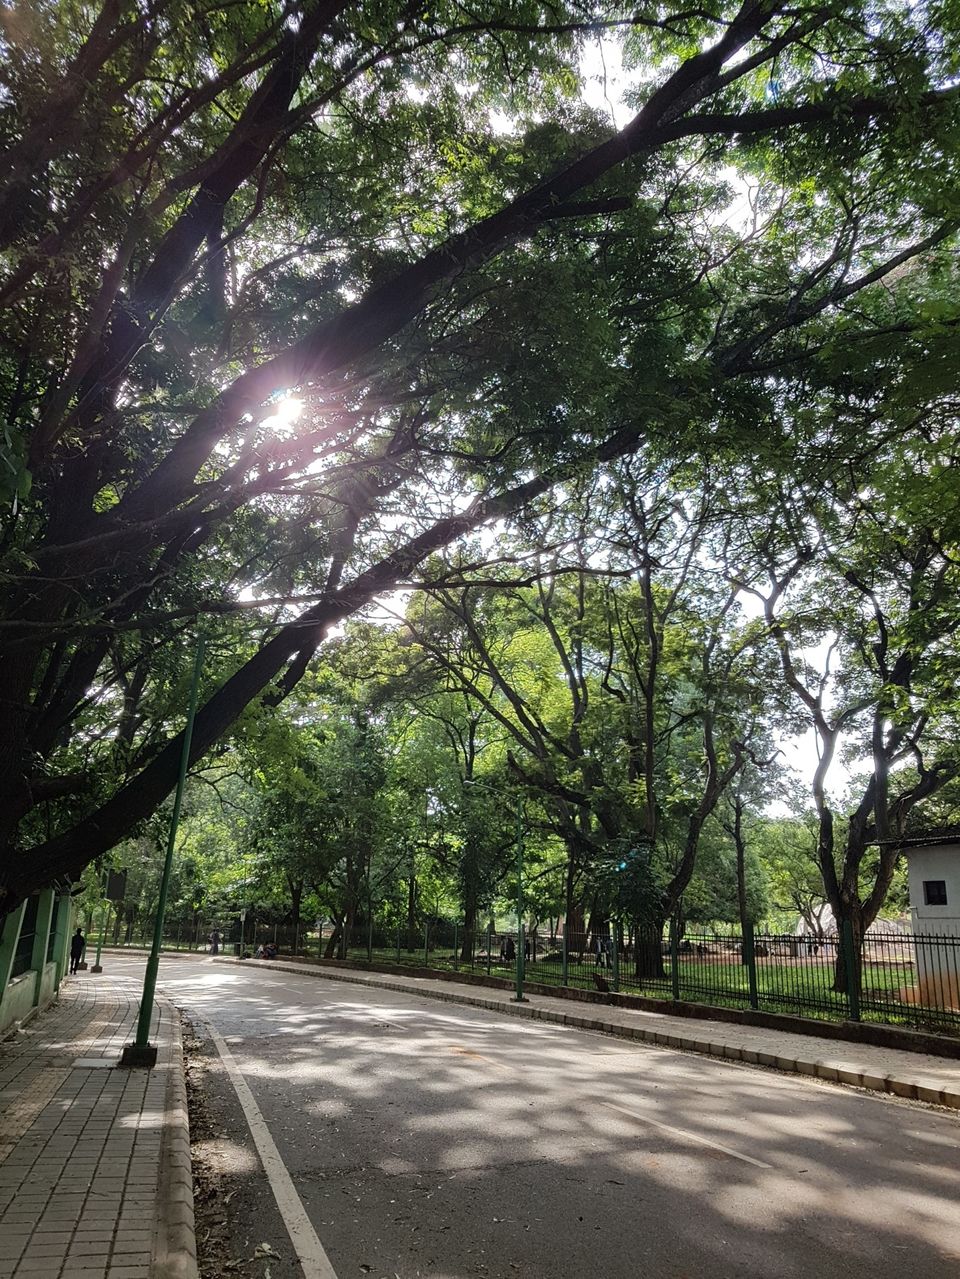 Green ‘lung’ at the heart of the city bengaluru - Tripoto